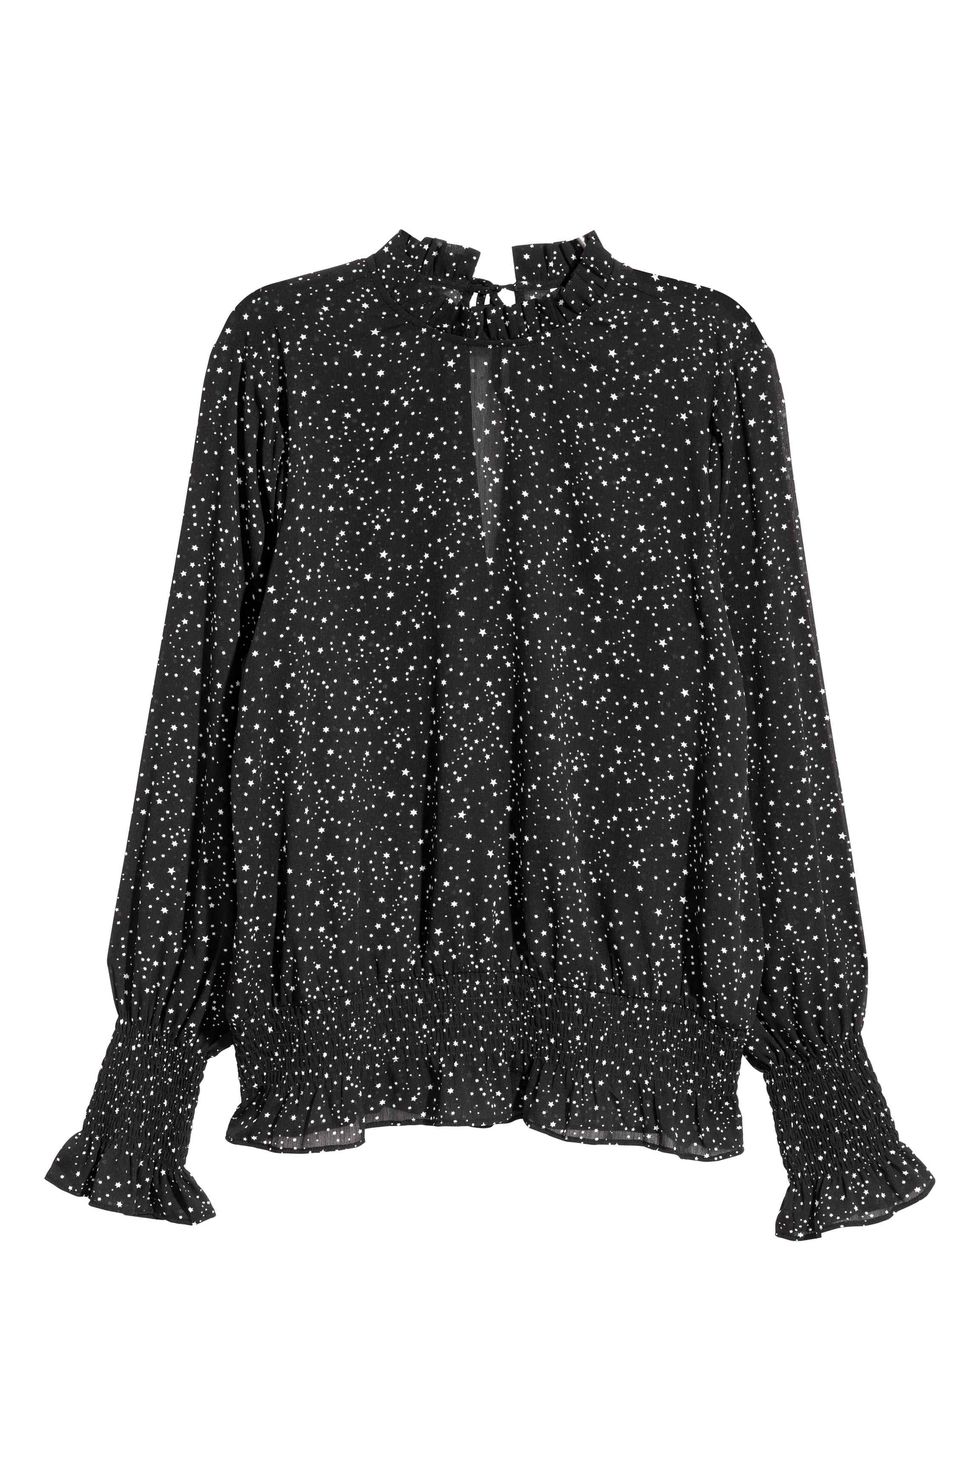 Clothing, Black, Shirt, Sleeve, Outerwear, Blouse, Top, Pattern, Neck, Collar, 